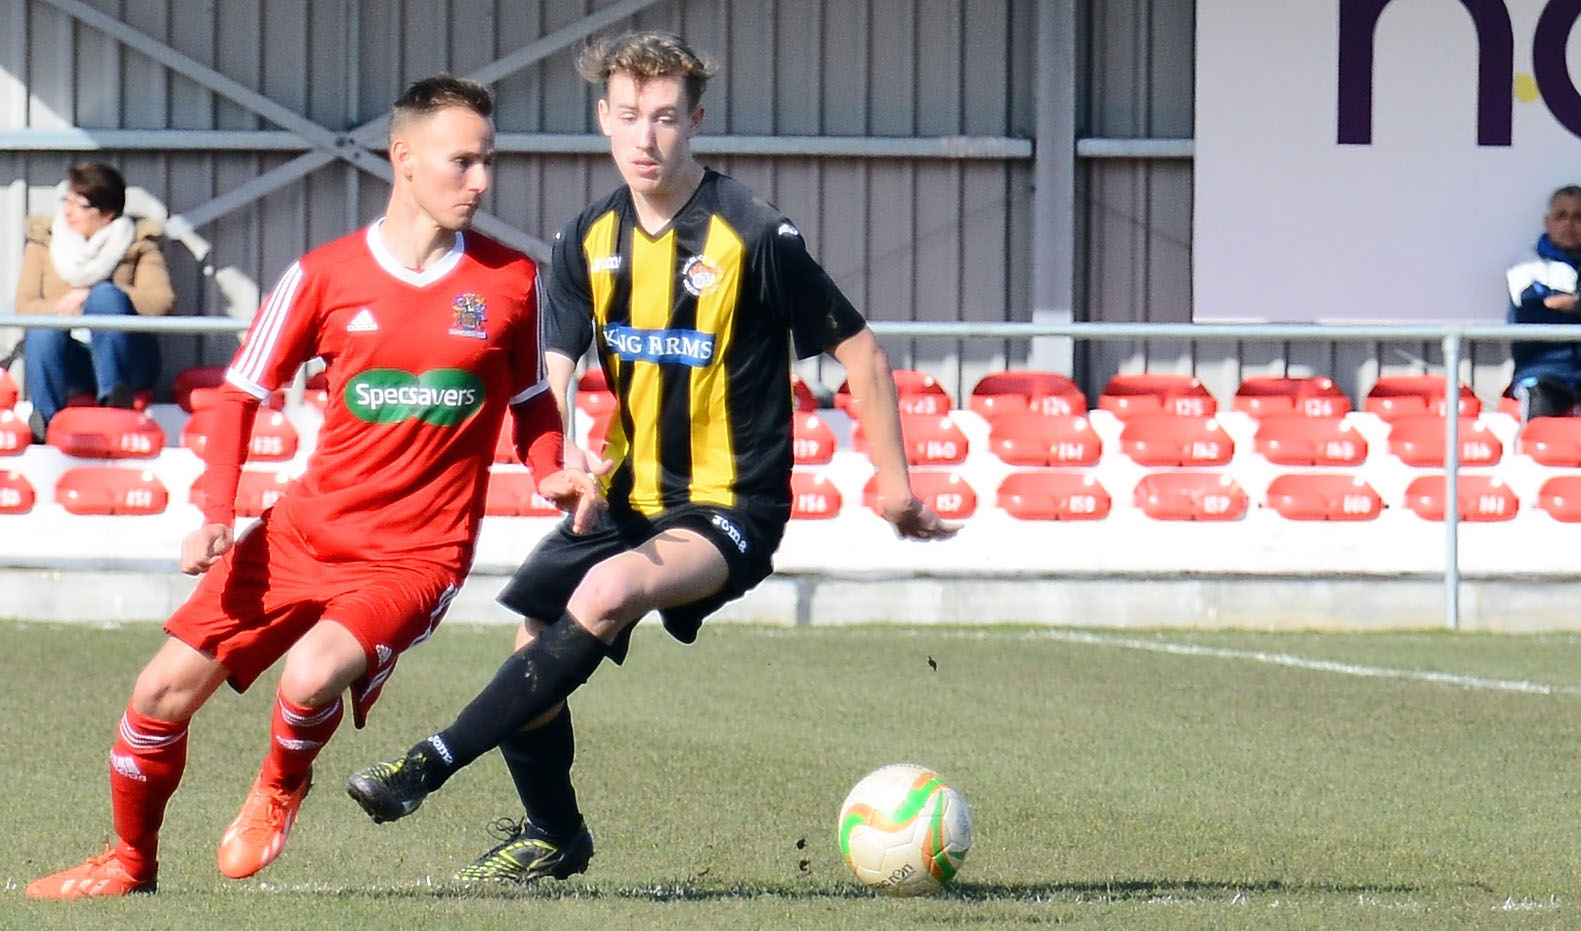 Defender Dan will be a Worth-y addition for Holbeach – The Voice